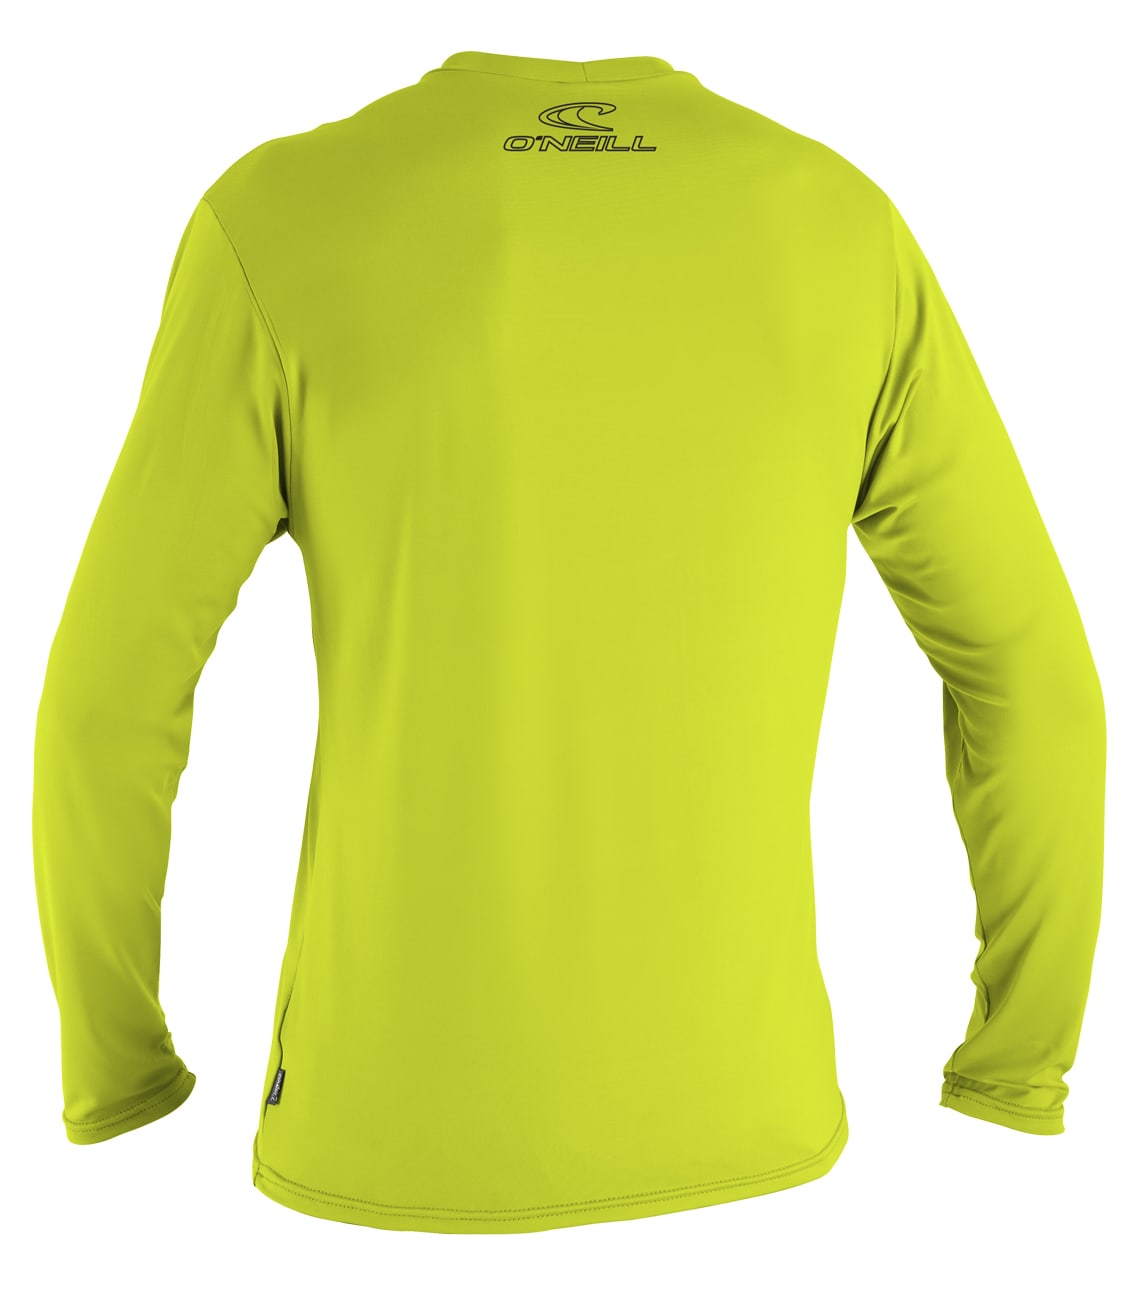 O'Neill Basic Skins Long Sleeve Sun Shirt Men Lime • Safety in water sports